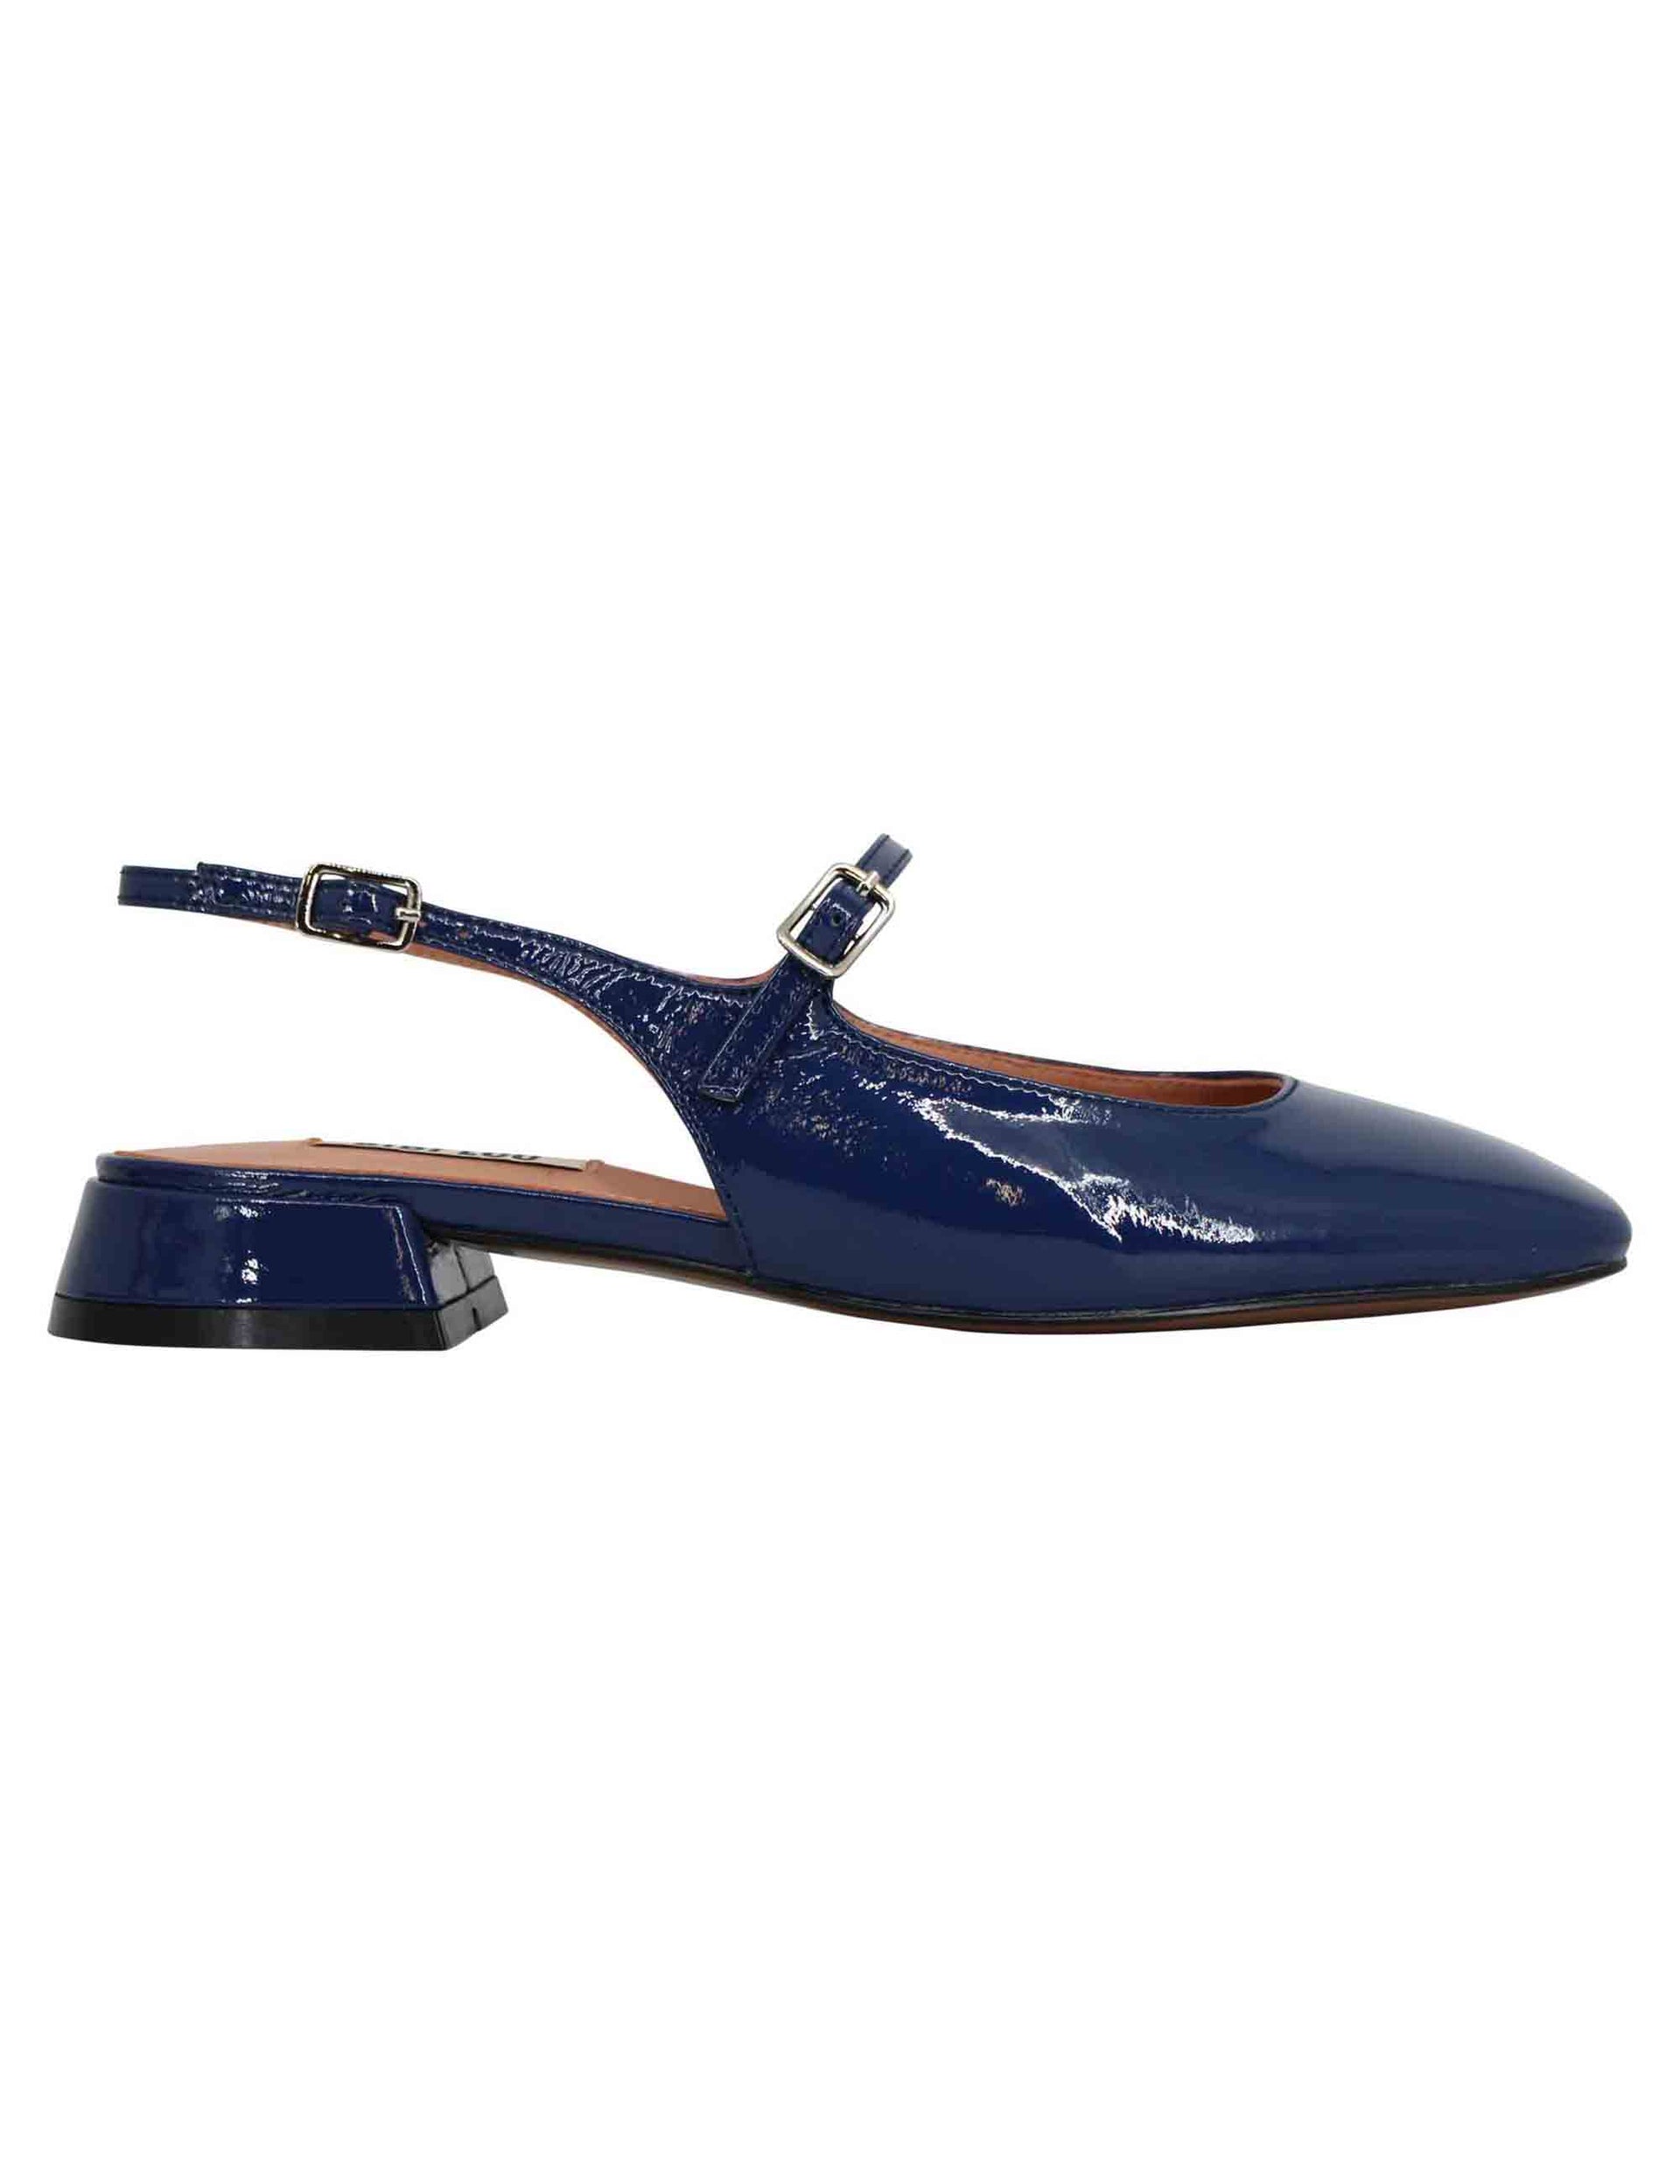 Women's slingback pumps in purple patent leather with strap on the instep Ava